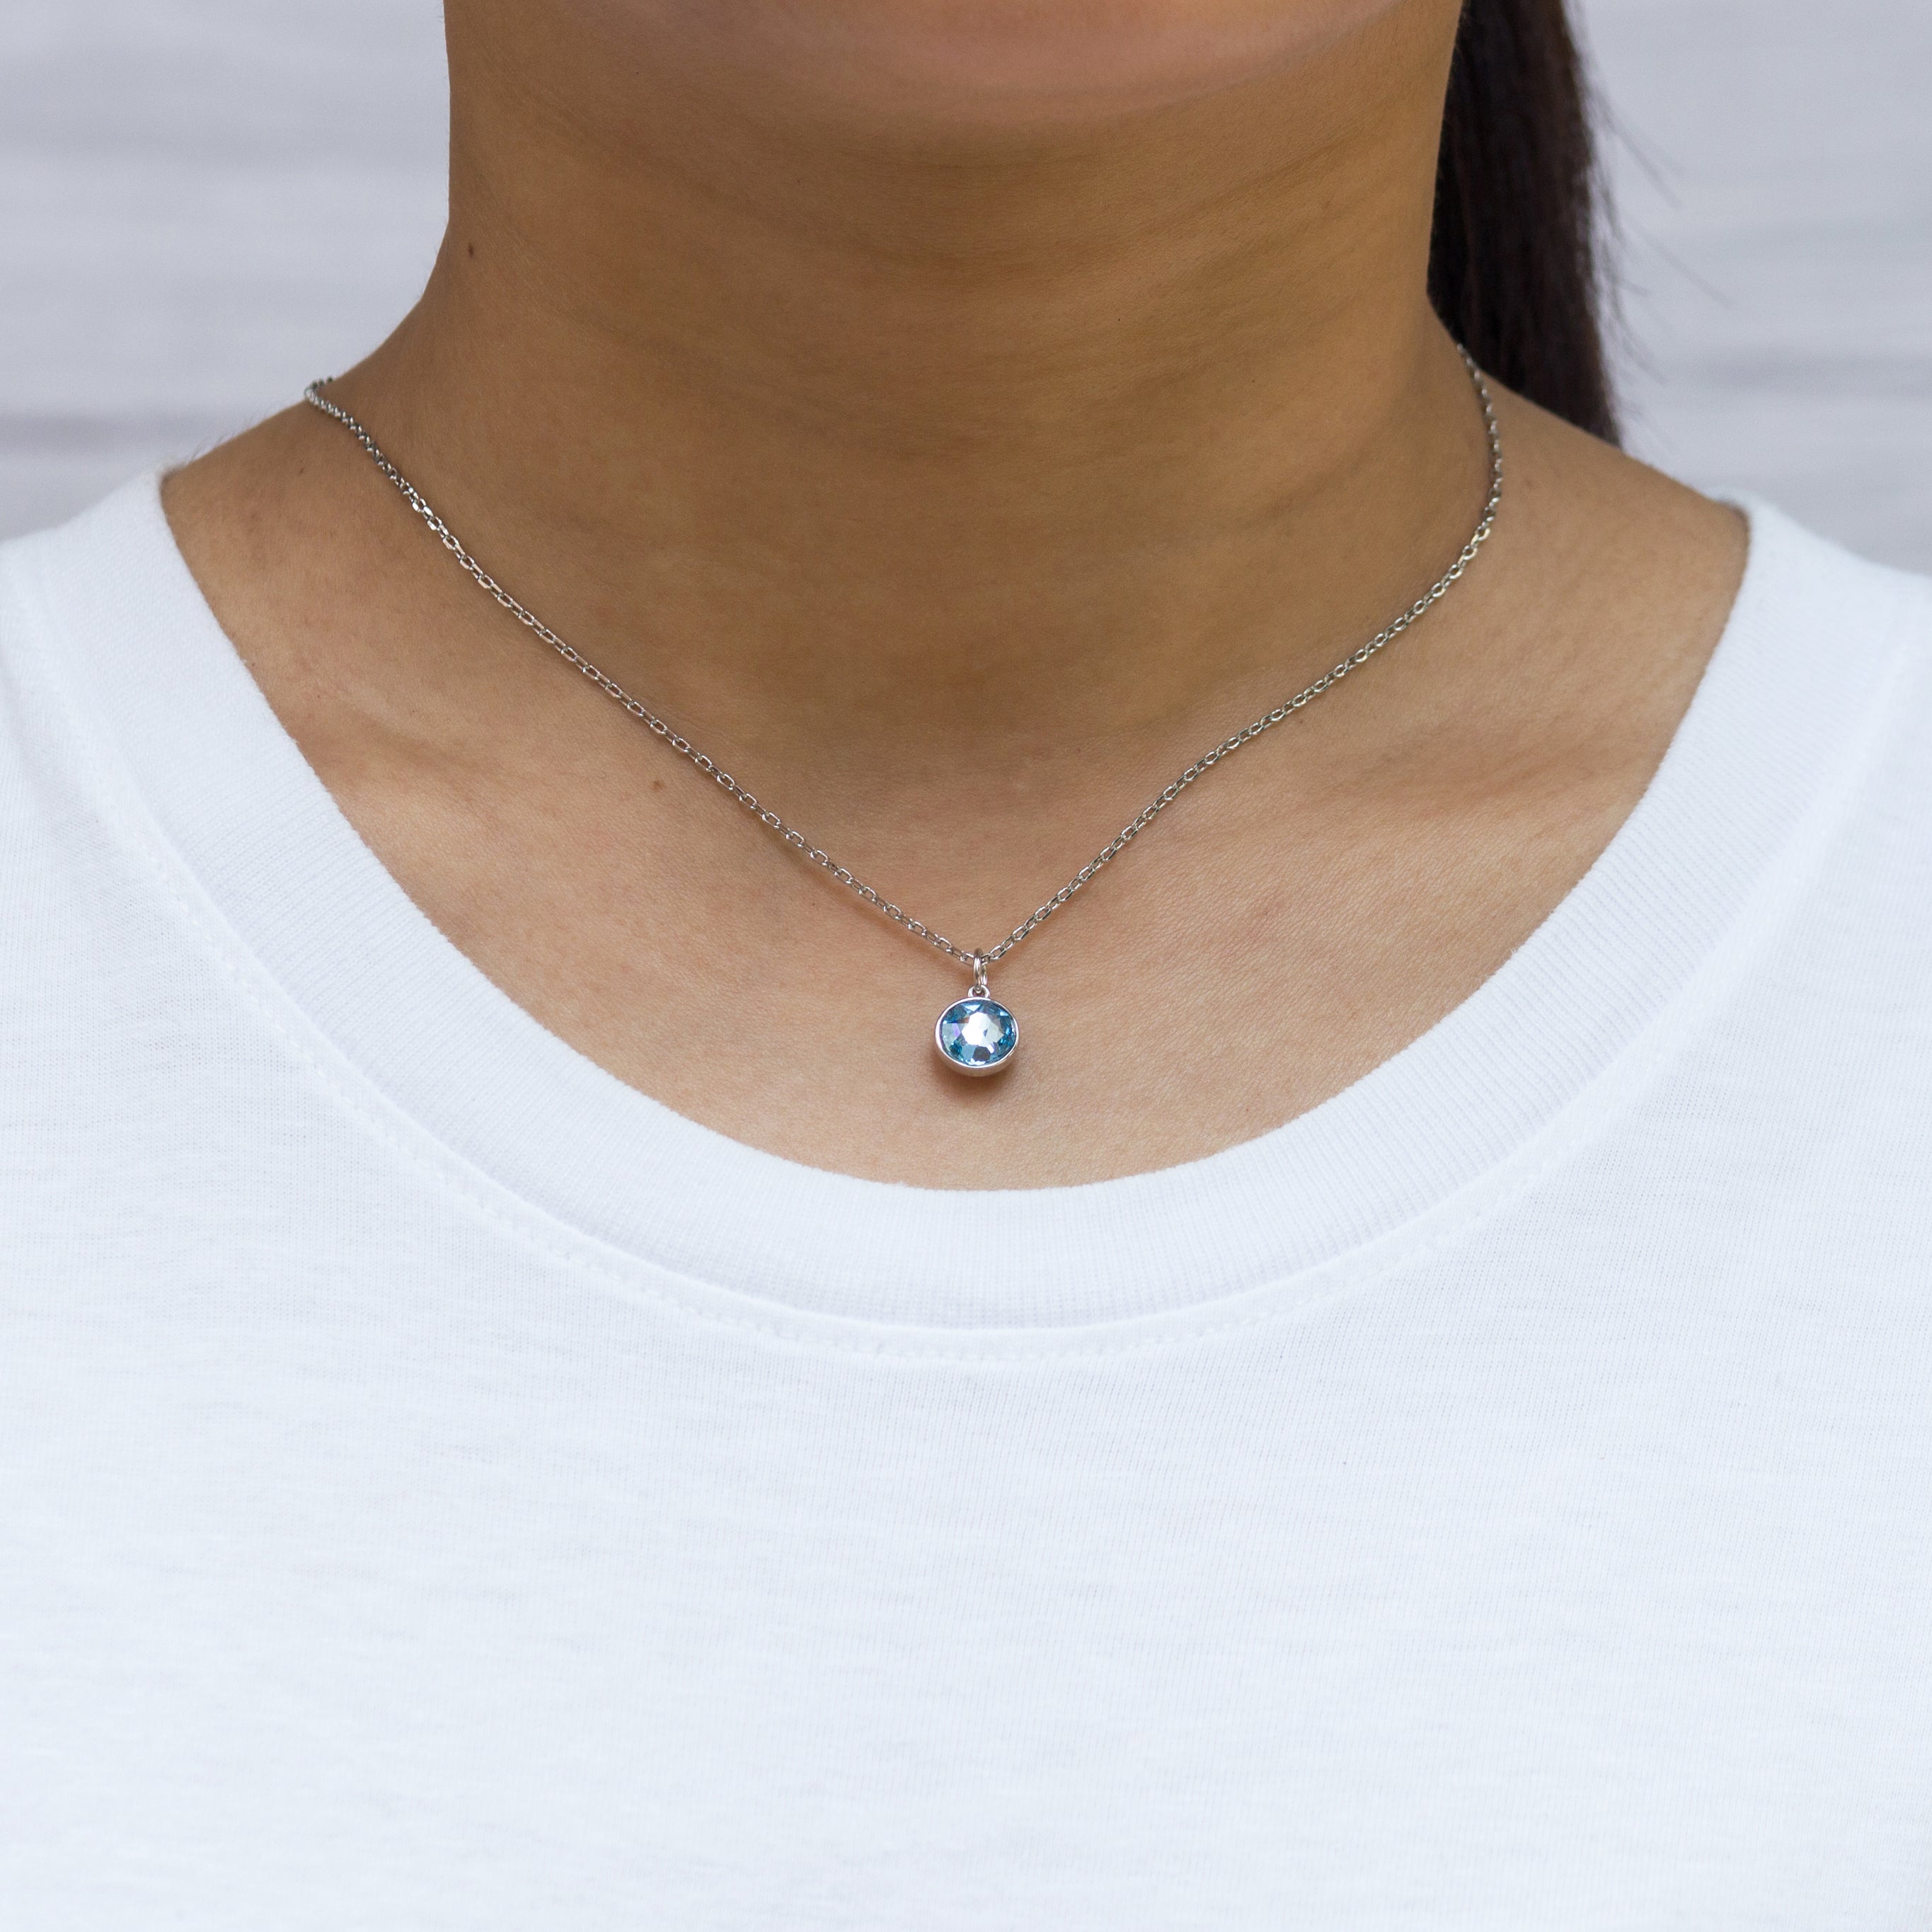 March (Aquamarine) Birthstone Necklace & Drop Earrings Set Created with Zircondia® Crystals